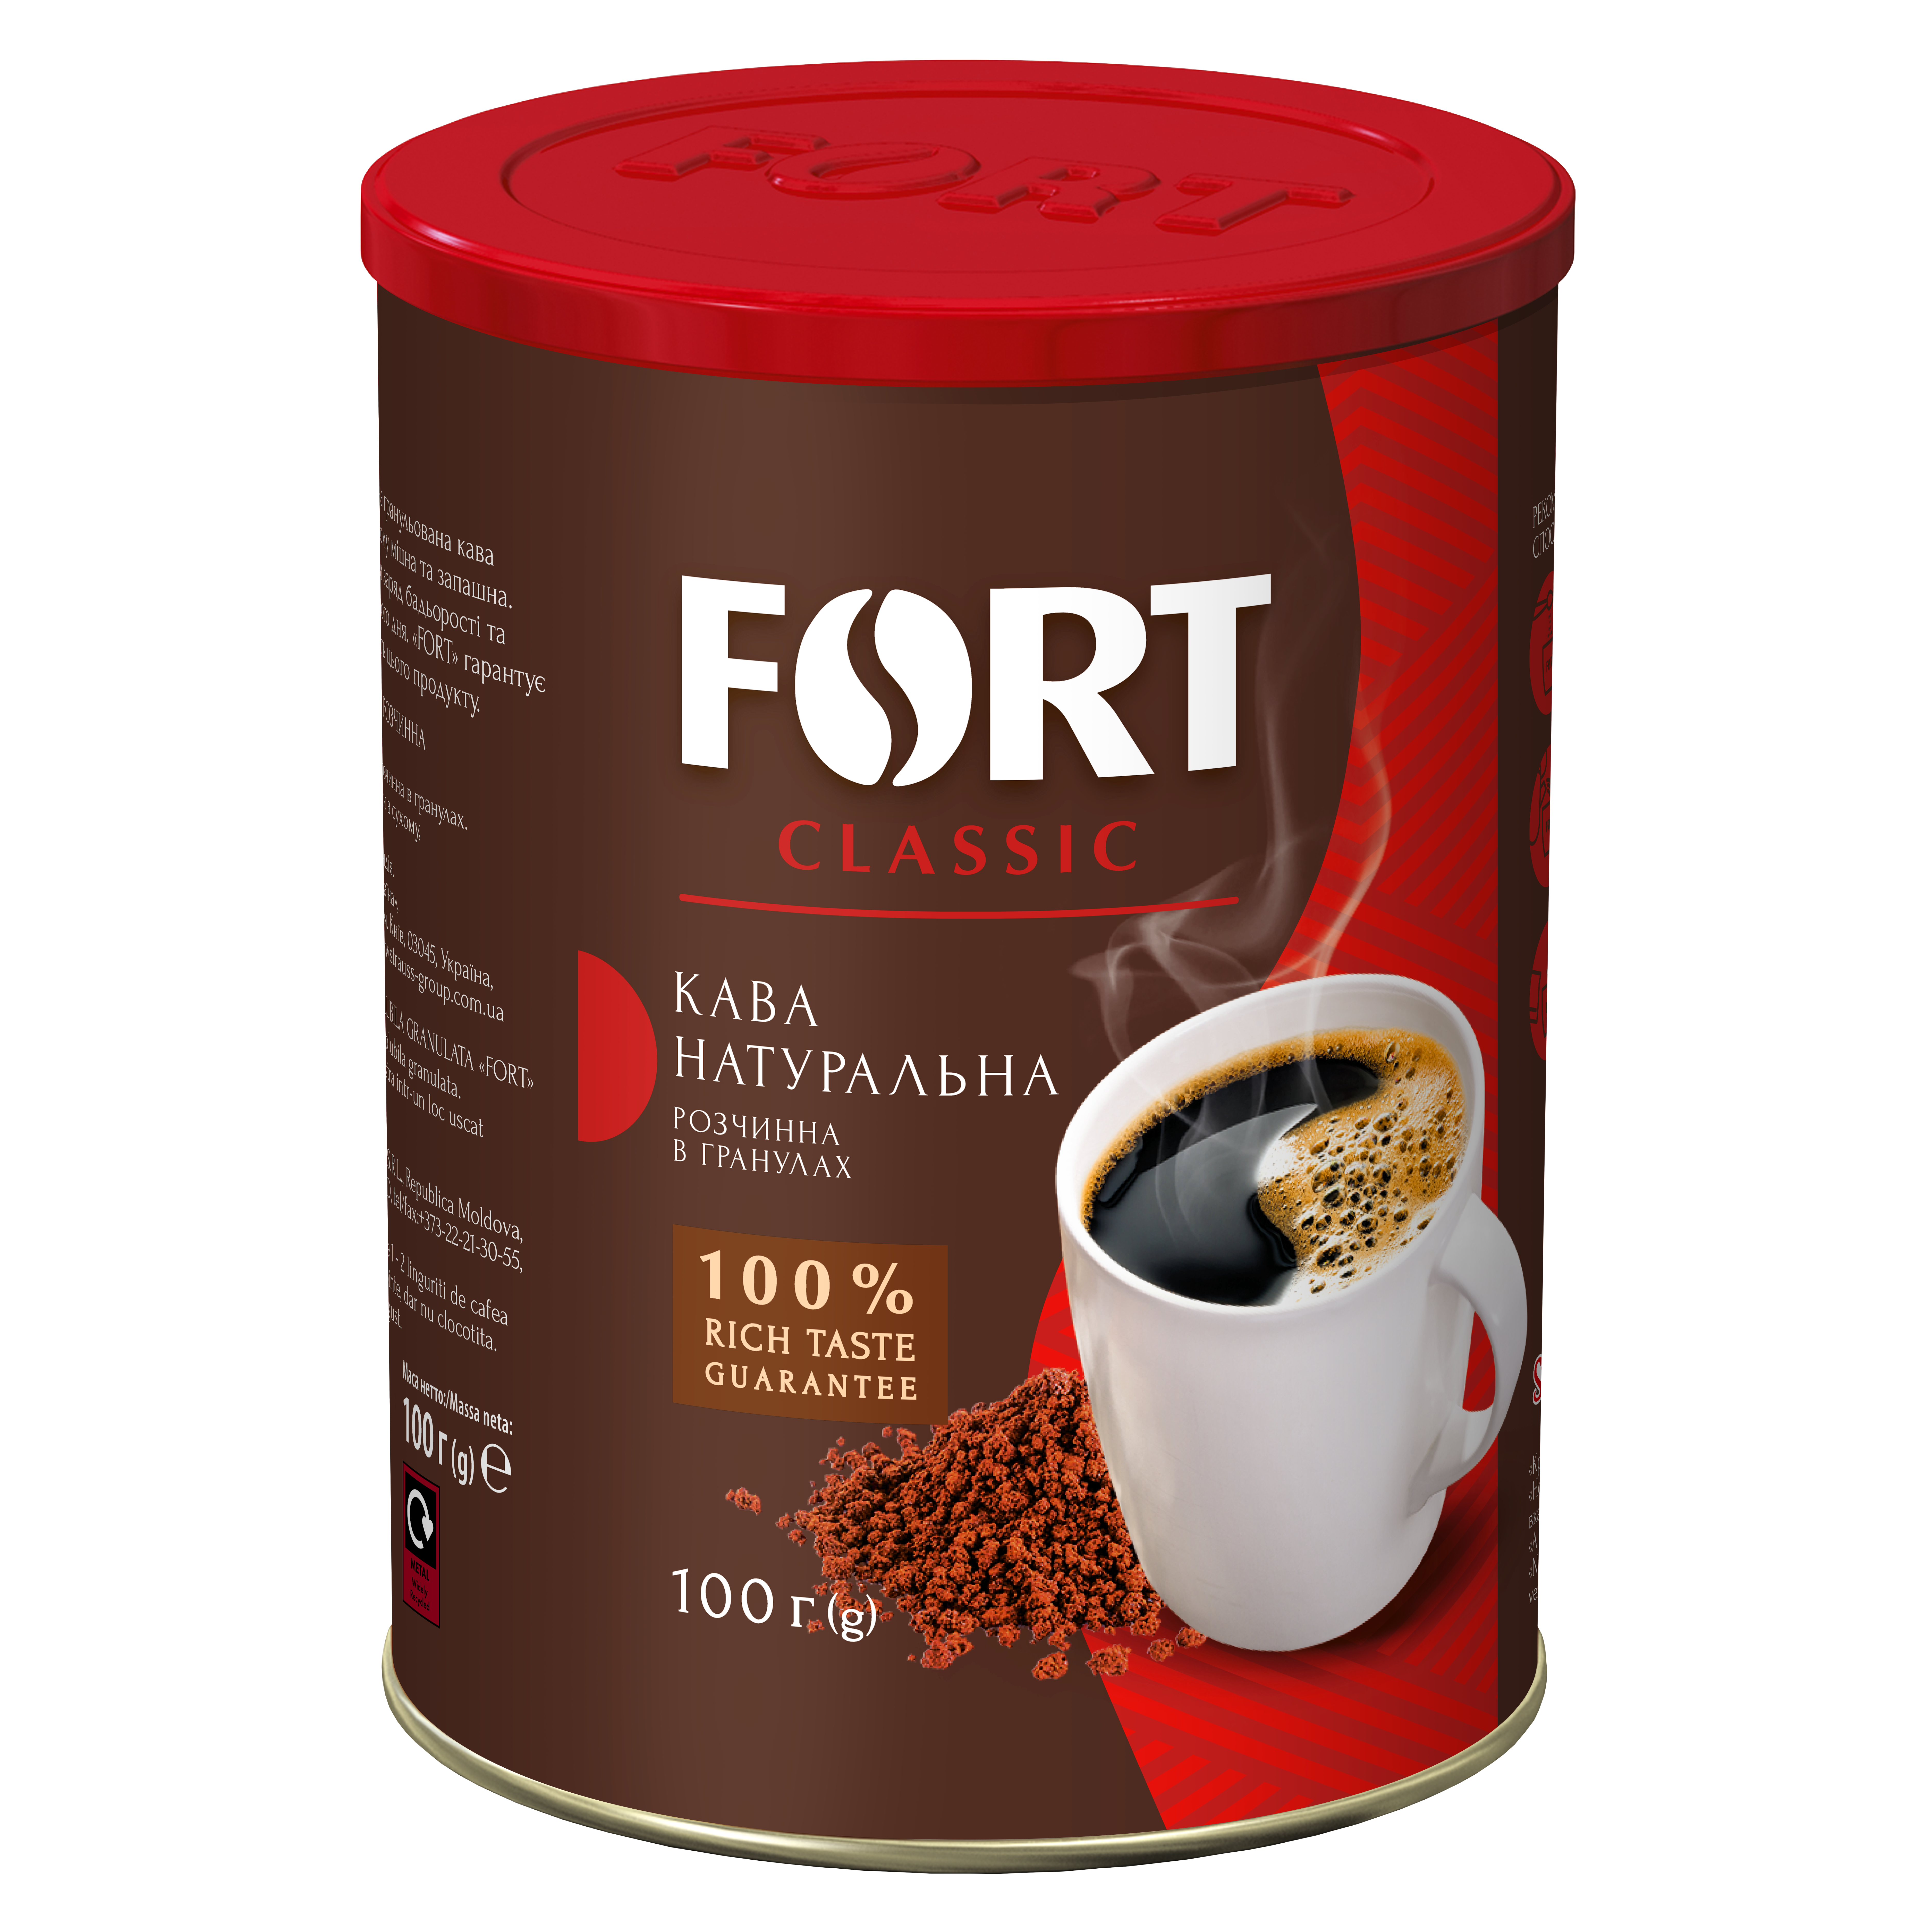 Instant coffee granules FORT